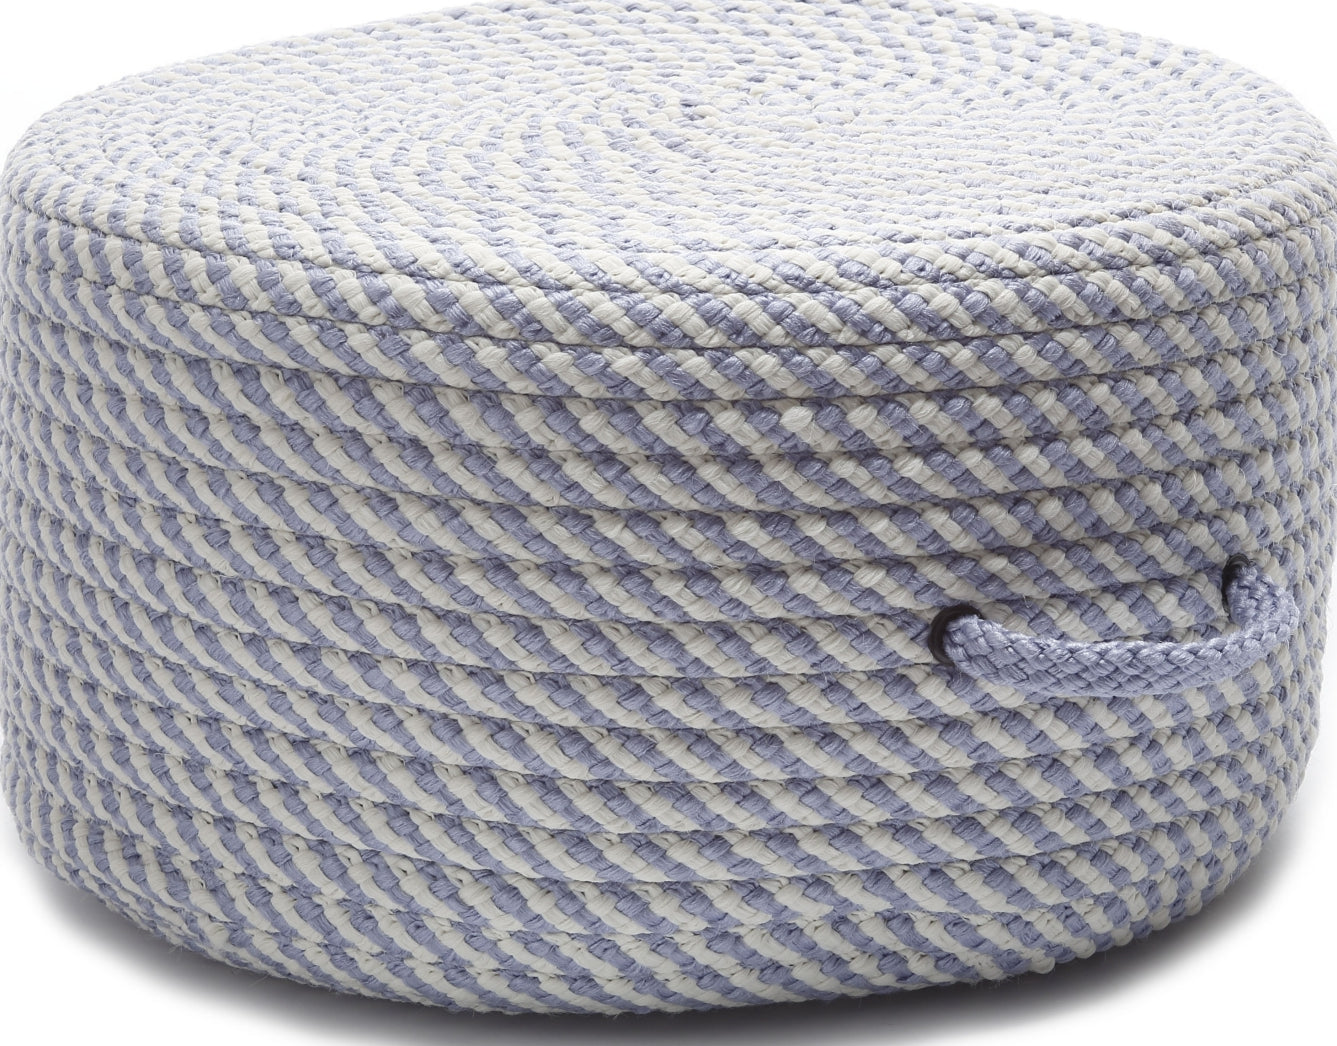 Colonial Mills Bright Twist Pouf UF41 Amethyst and White